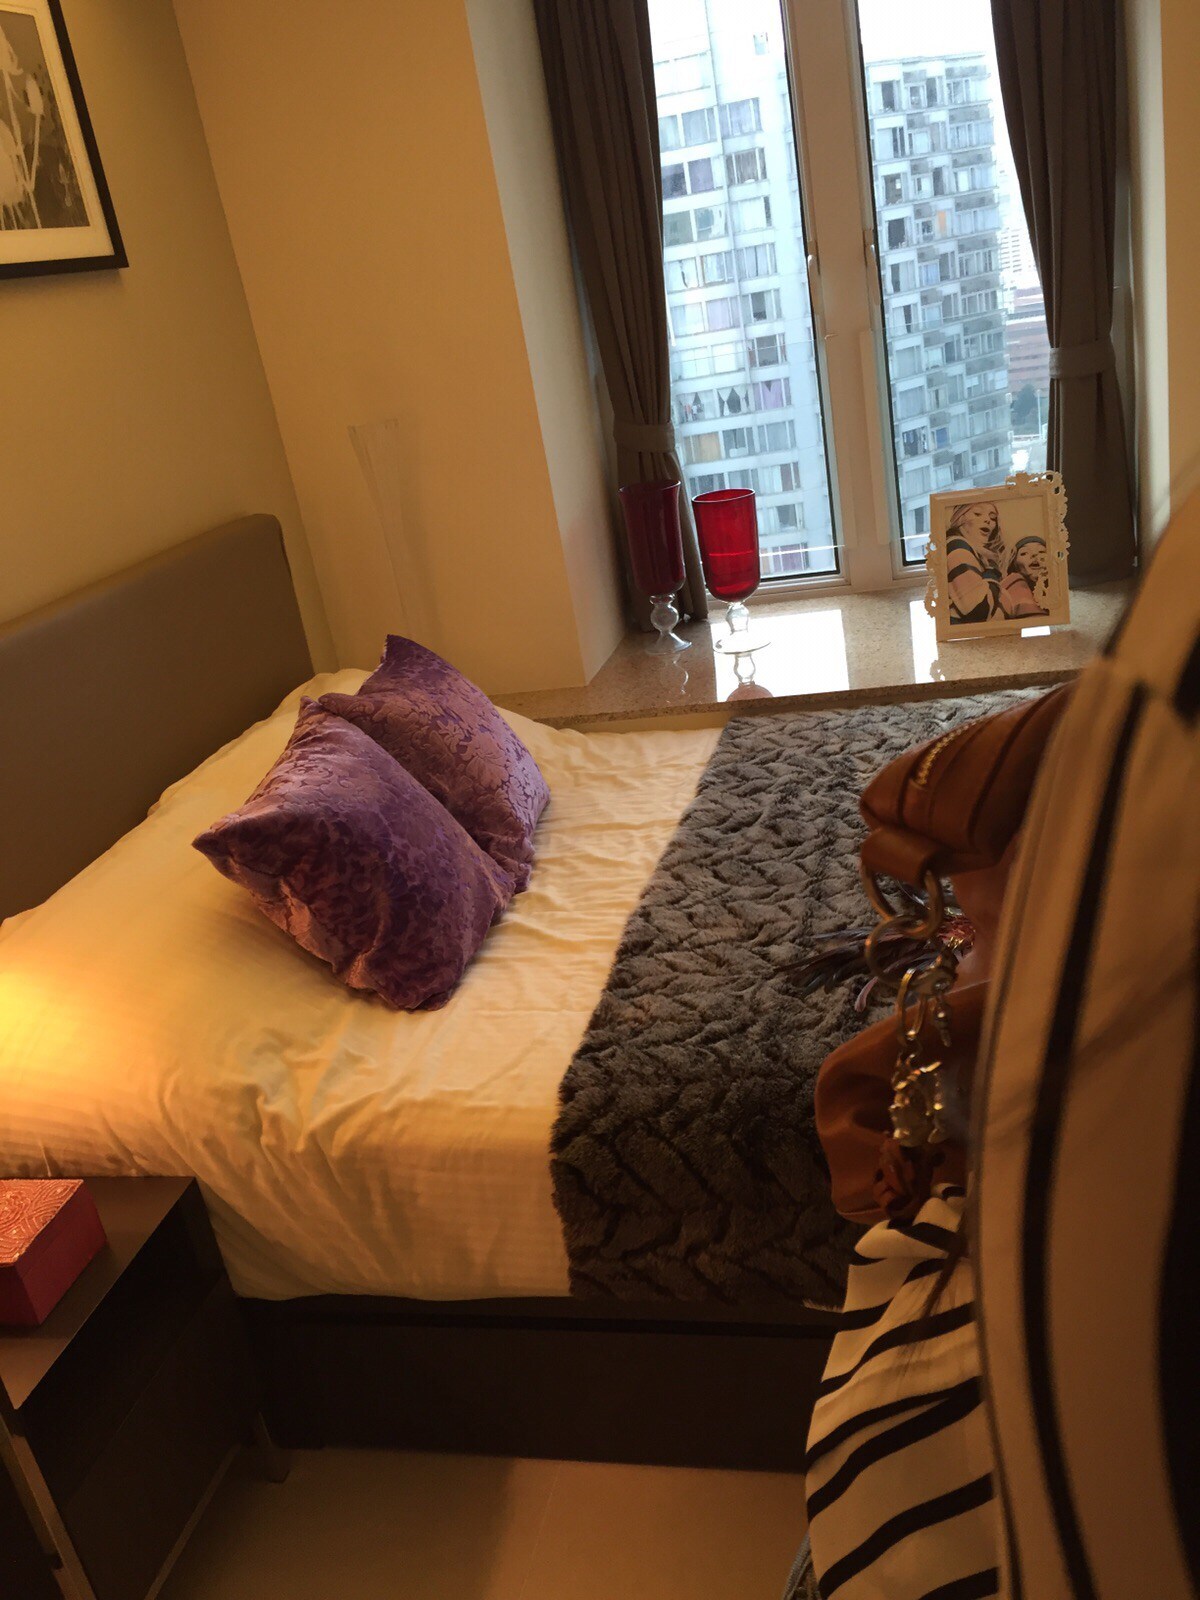 Super clean room in the heart of HK